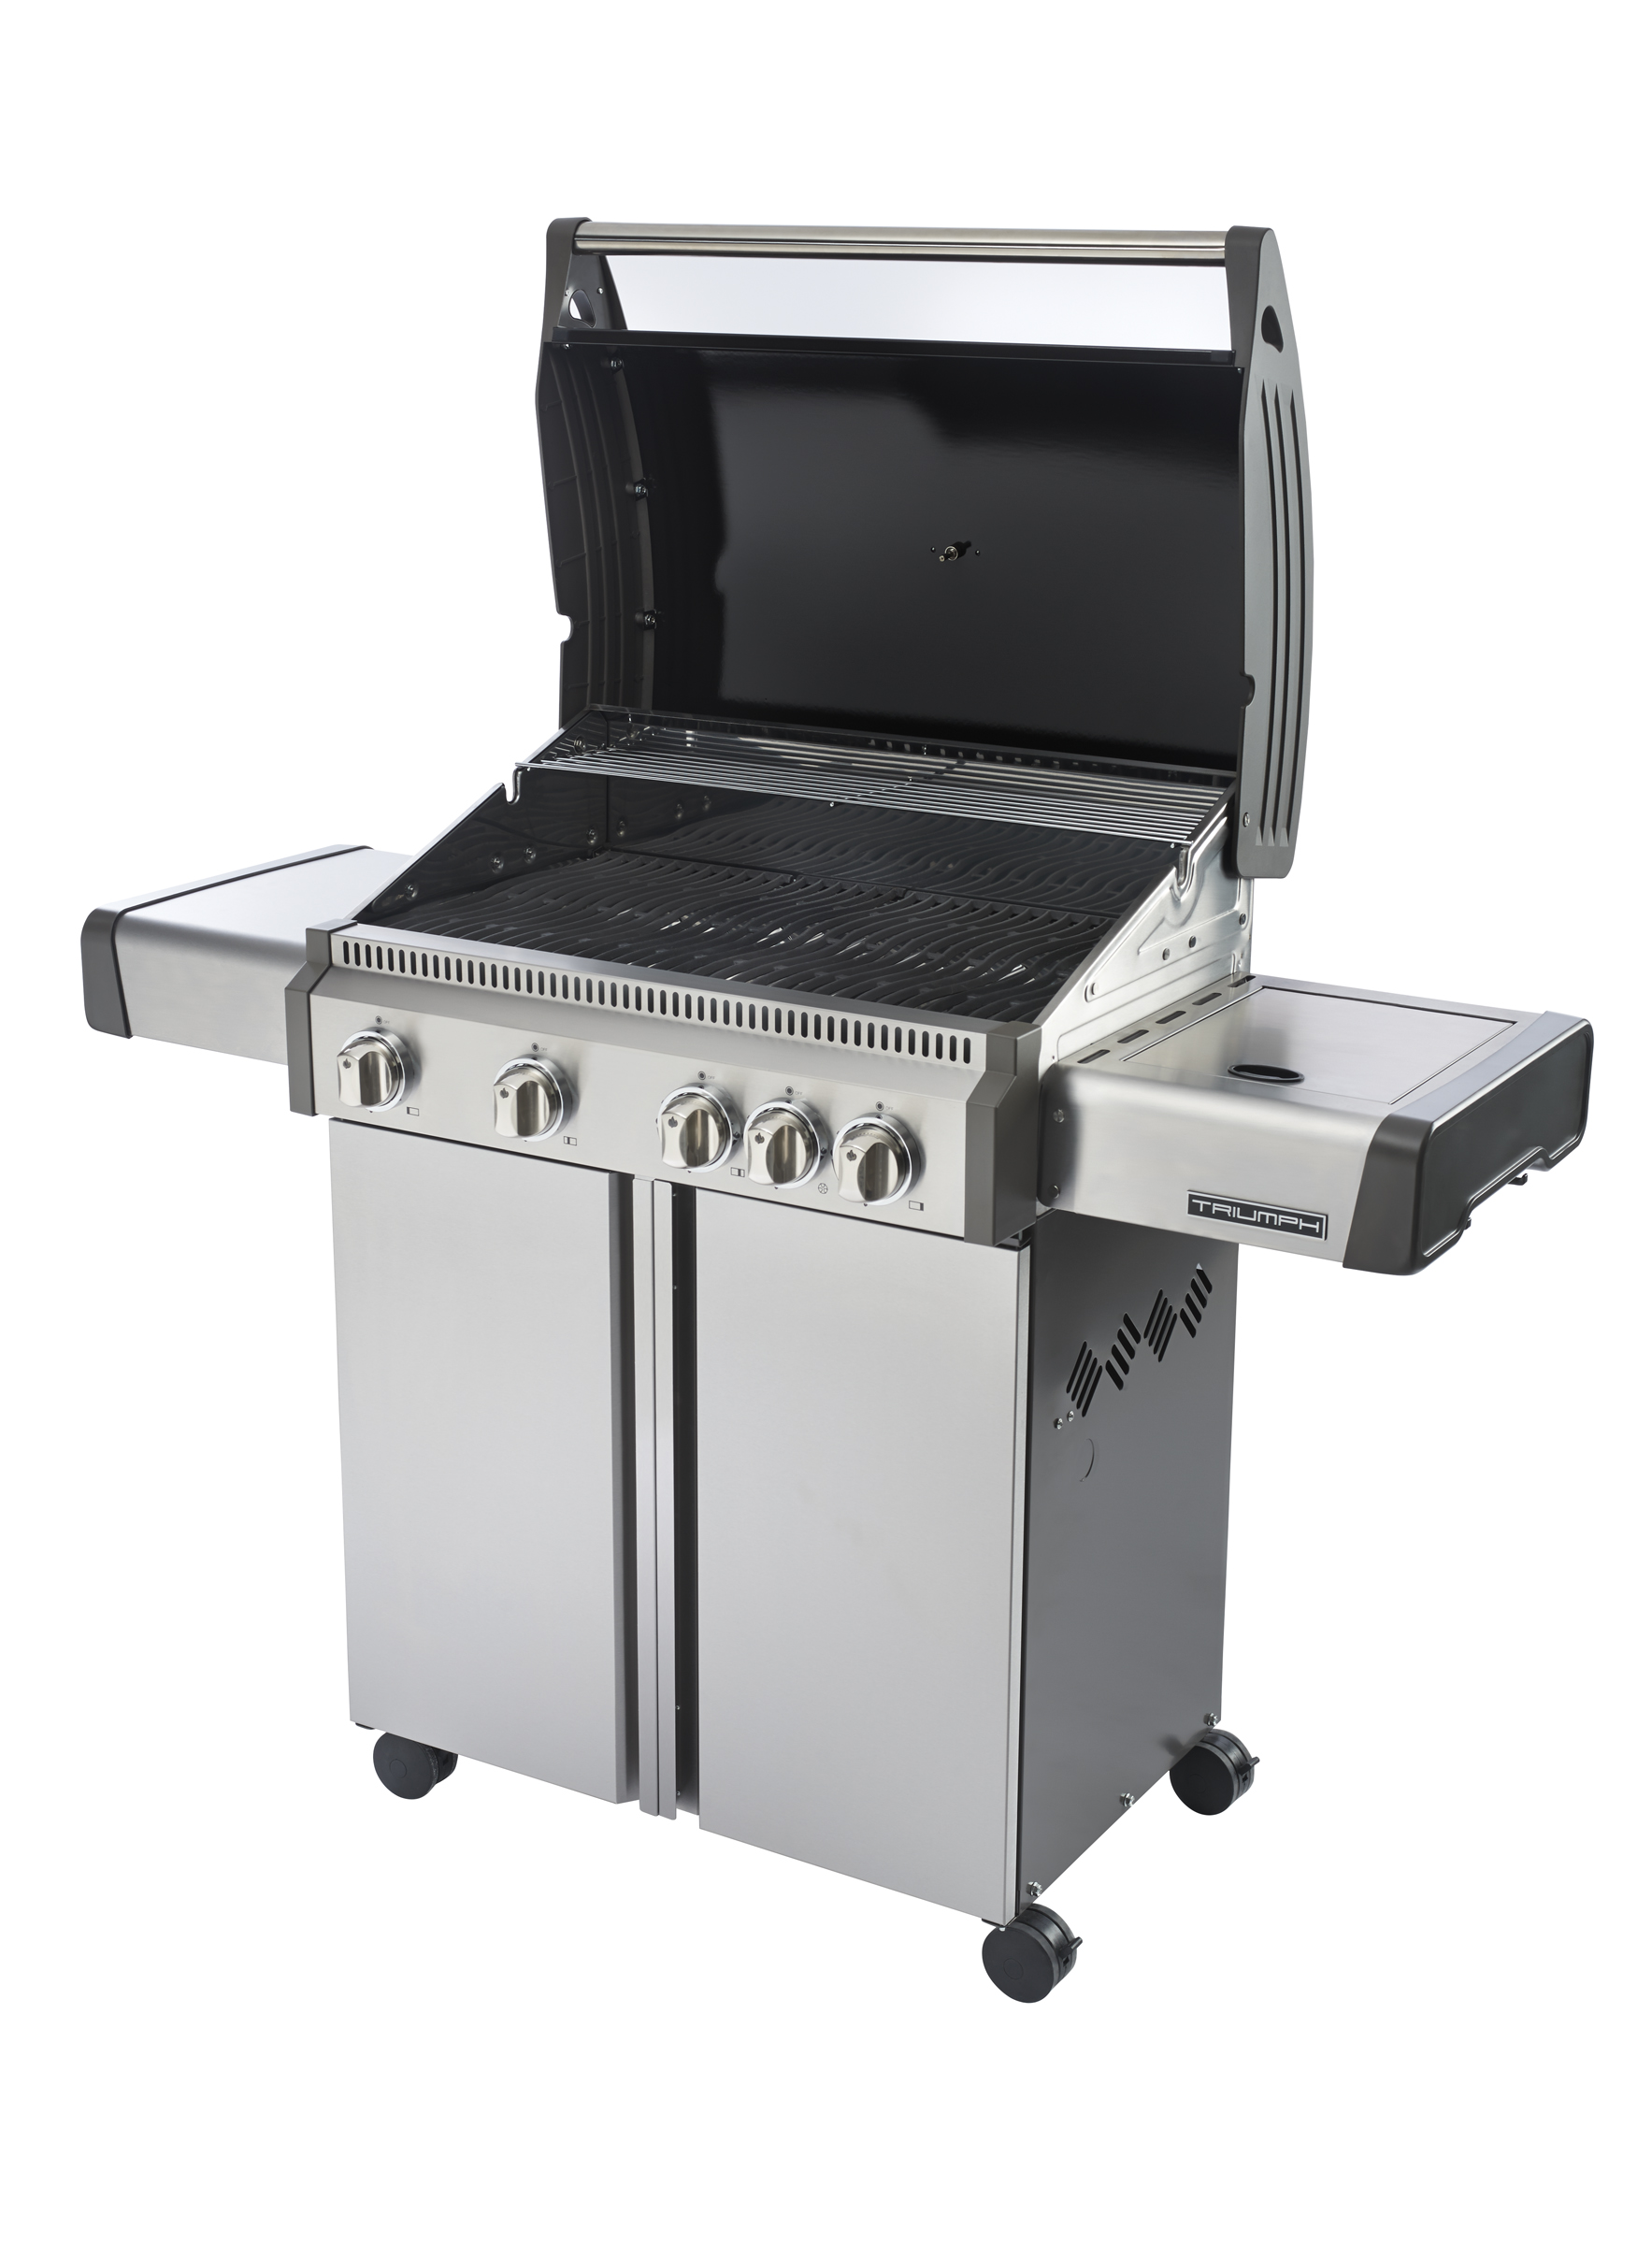 Napoleon Triumph® 495 LP Grill with Side Burner, Black with Cover Included - image 3 of 9